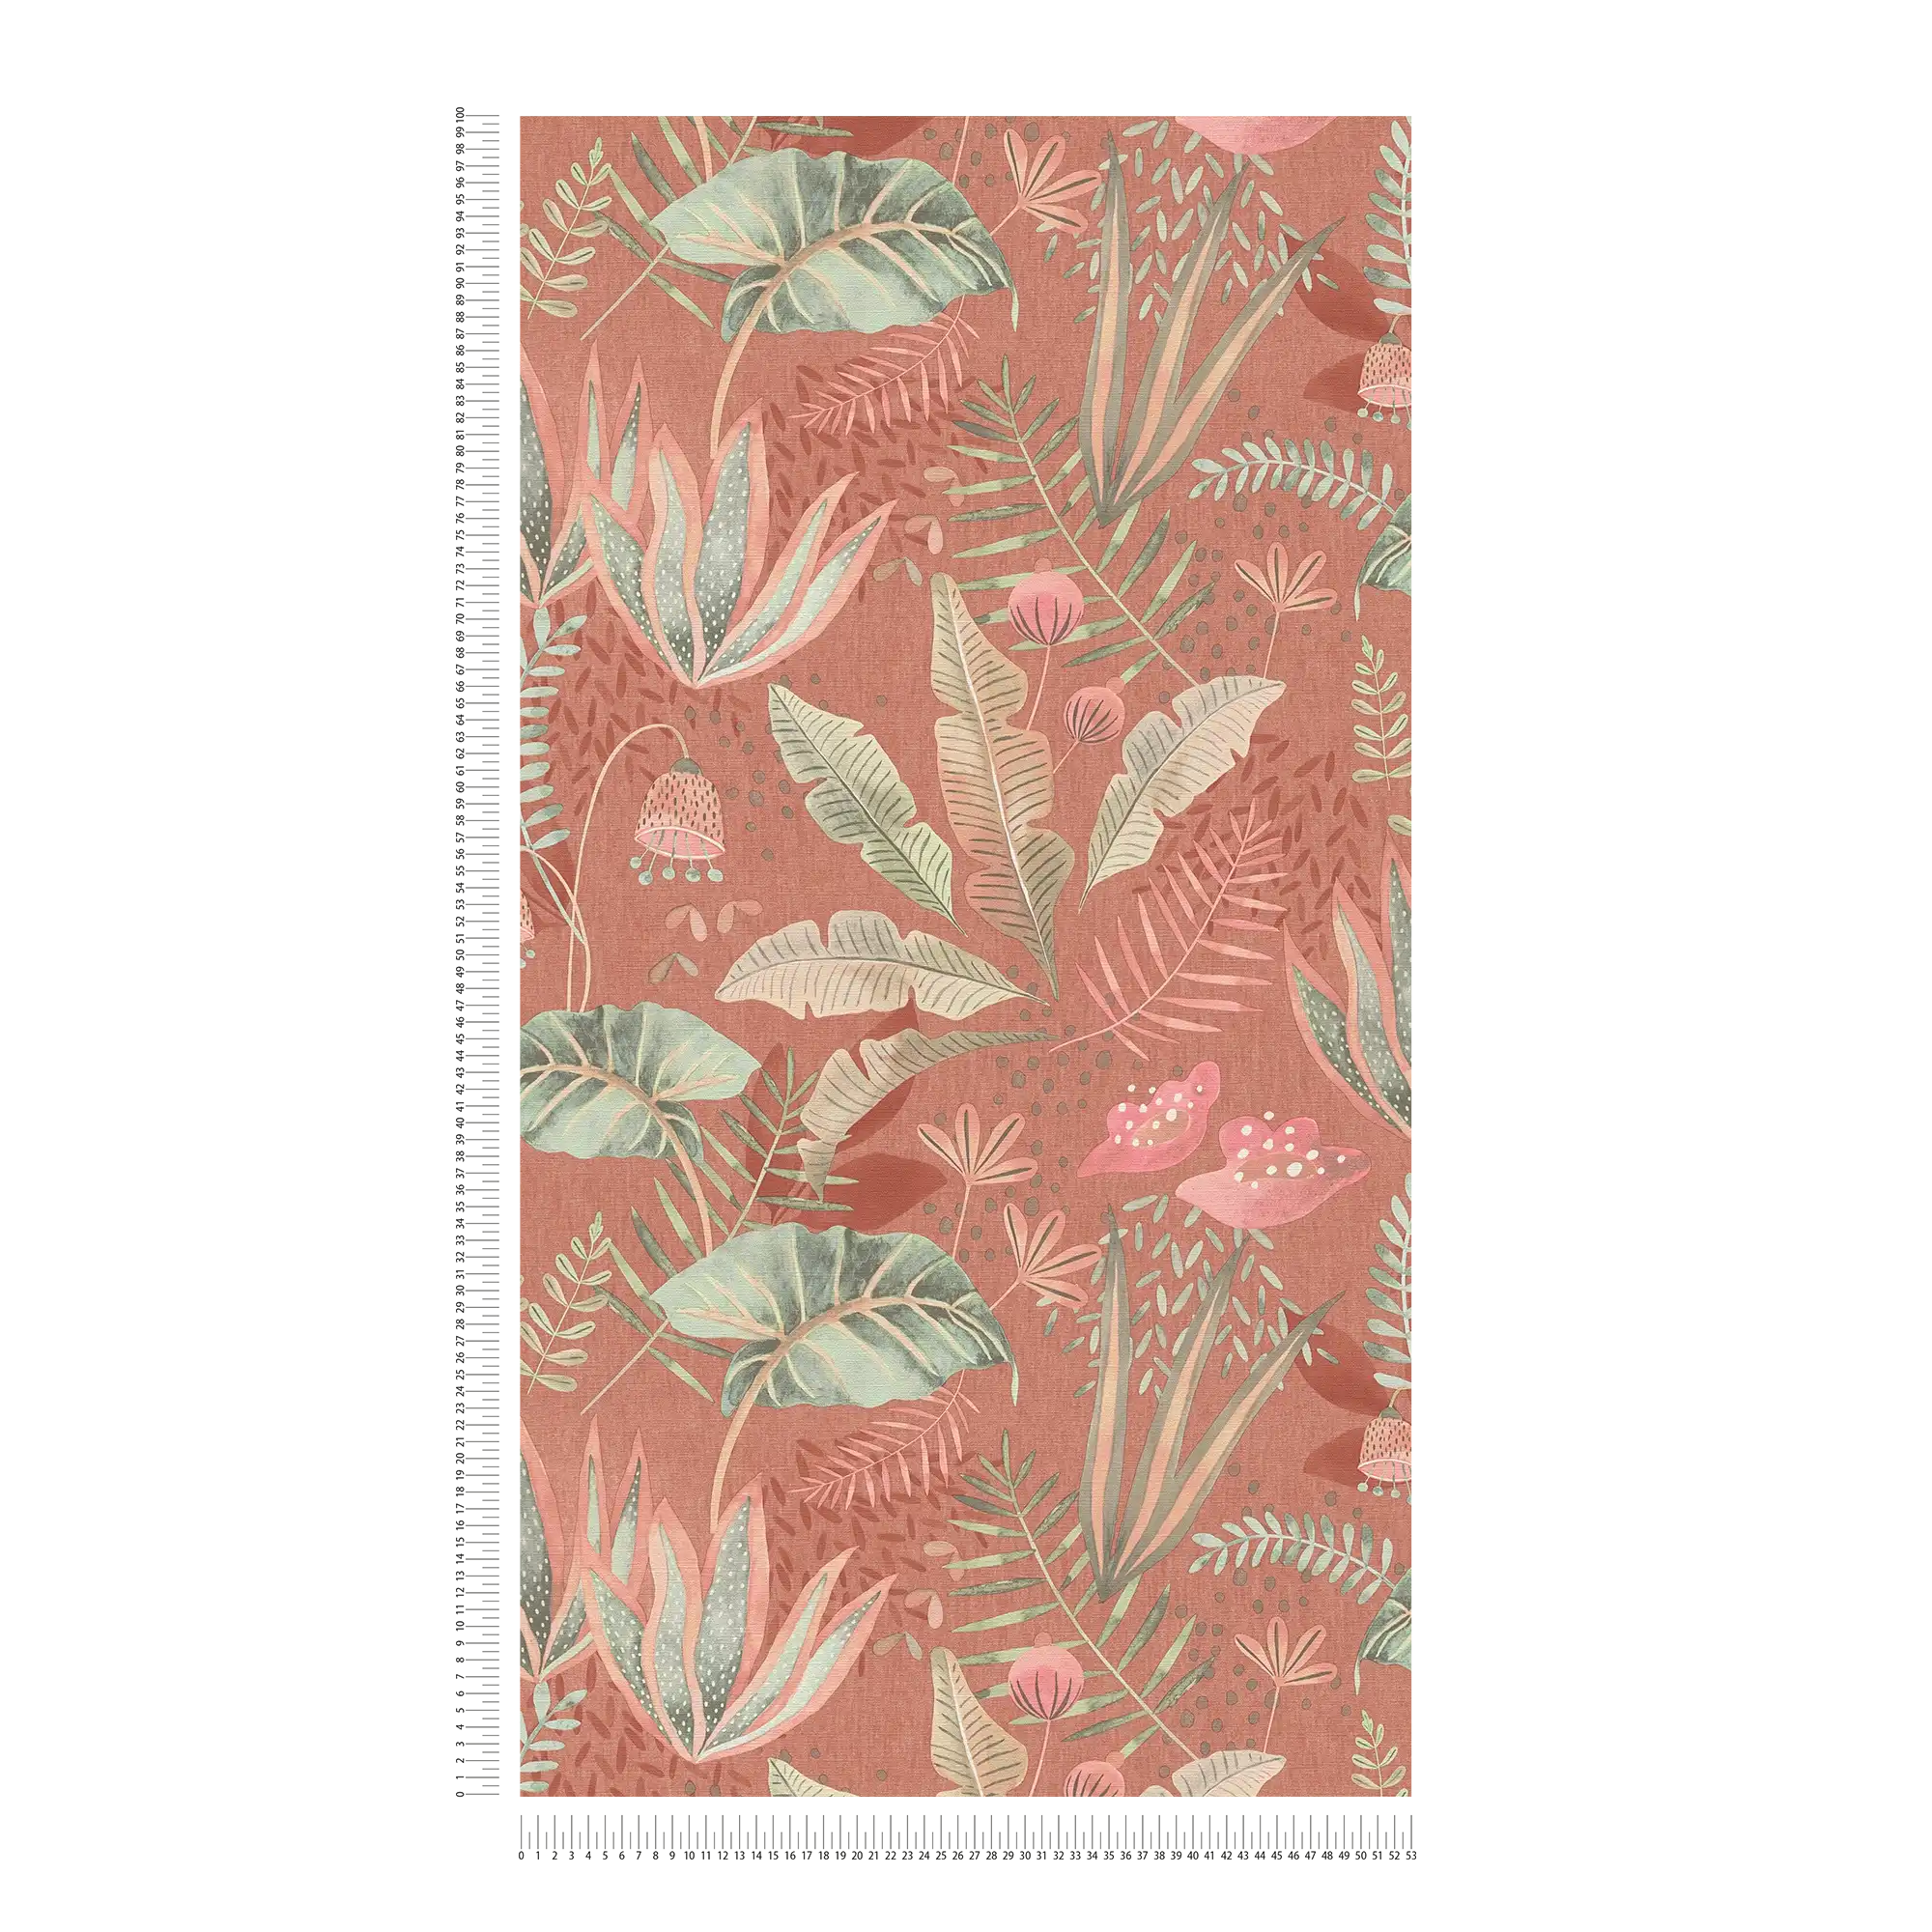             Floral wallpaper with mixed leaves slightly textured, matt - red, orange, green
        